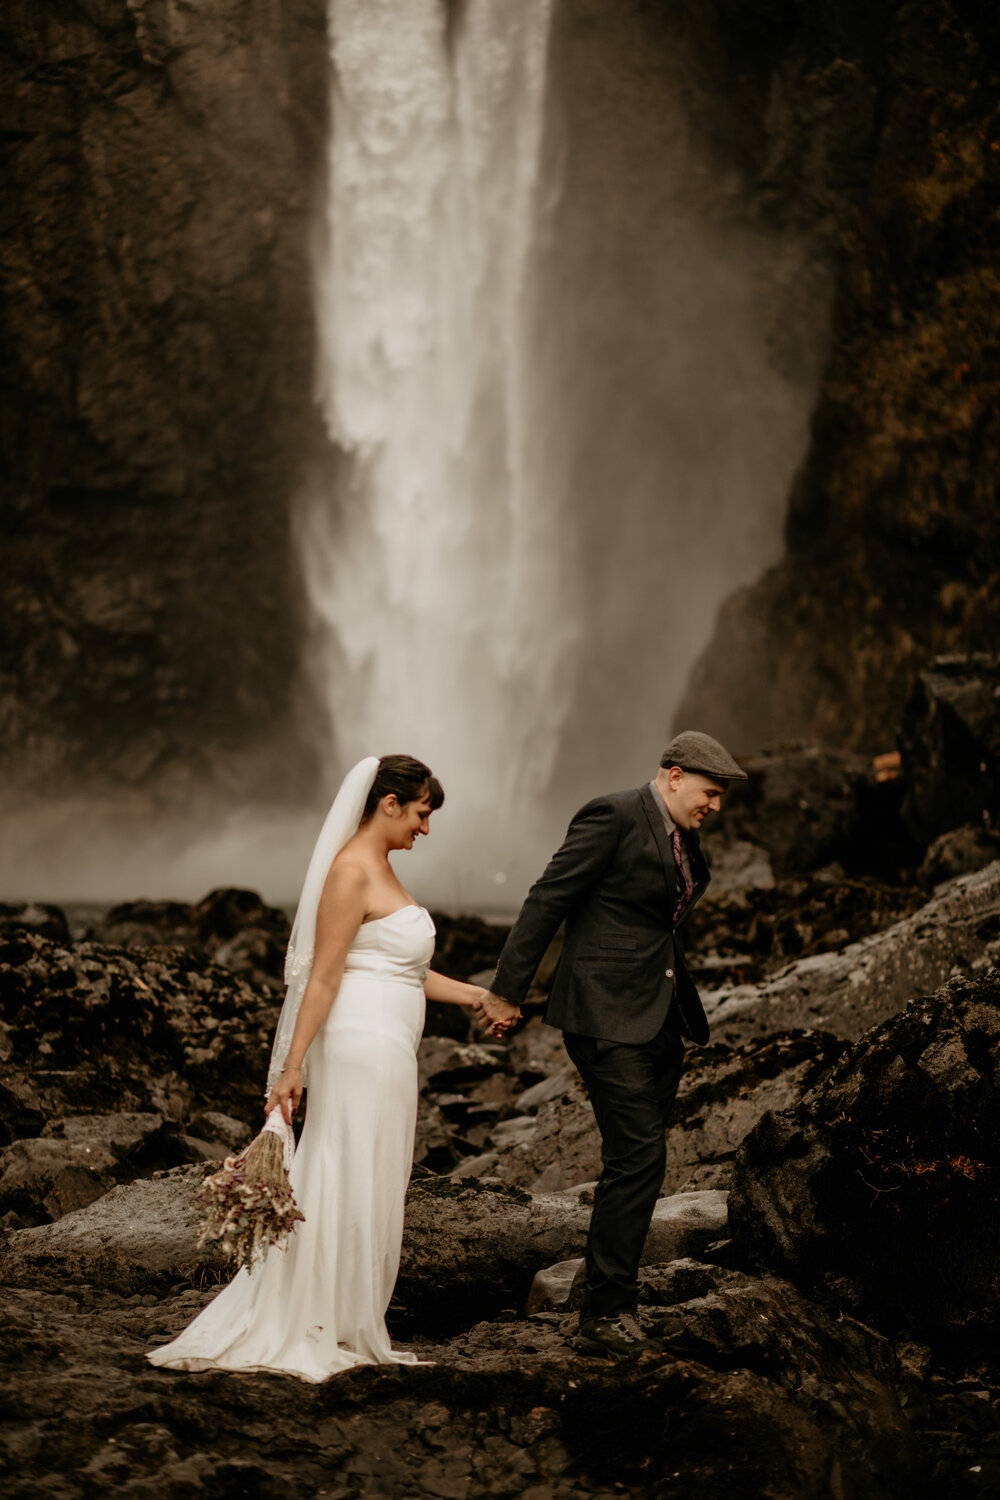 where to elope in washington state?